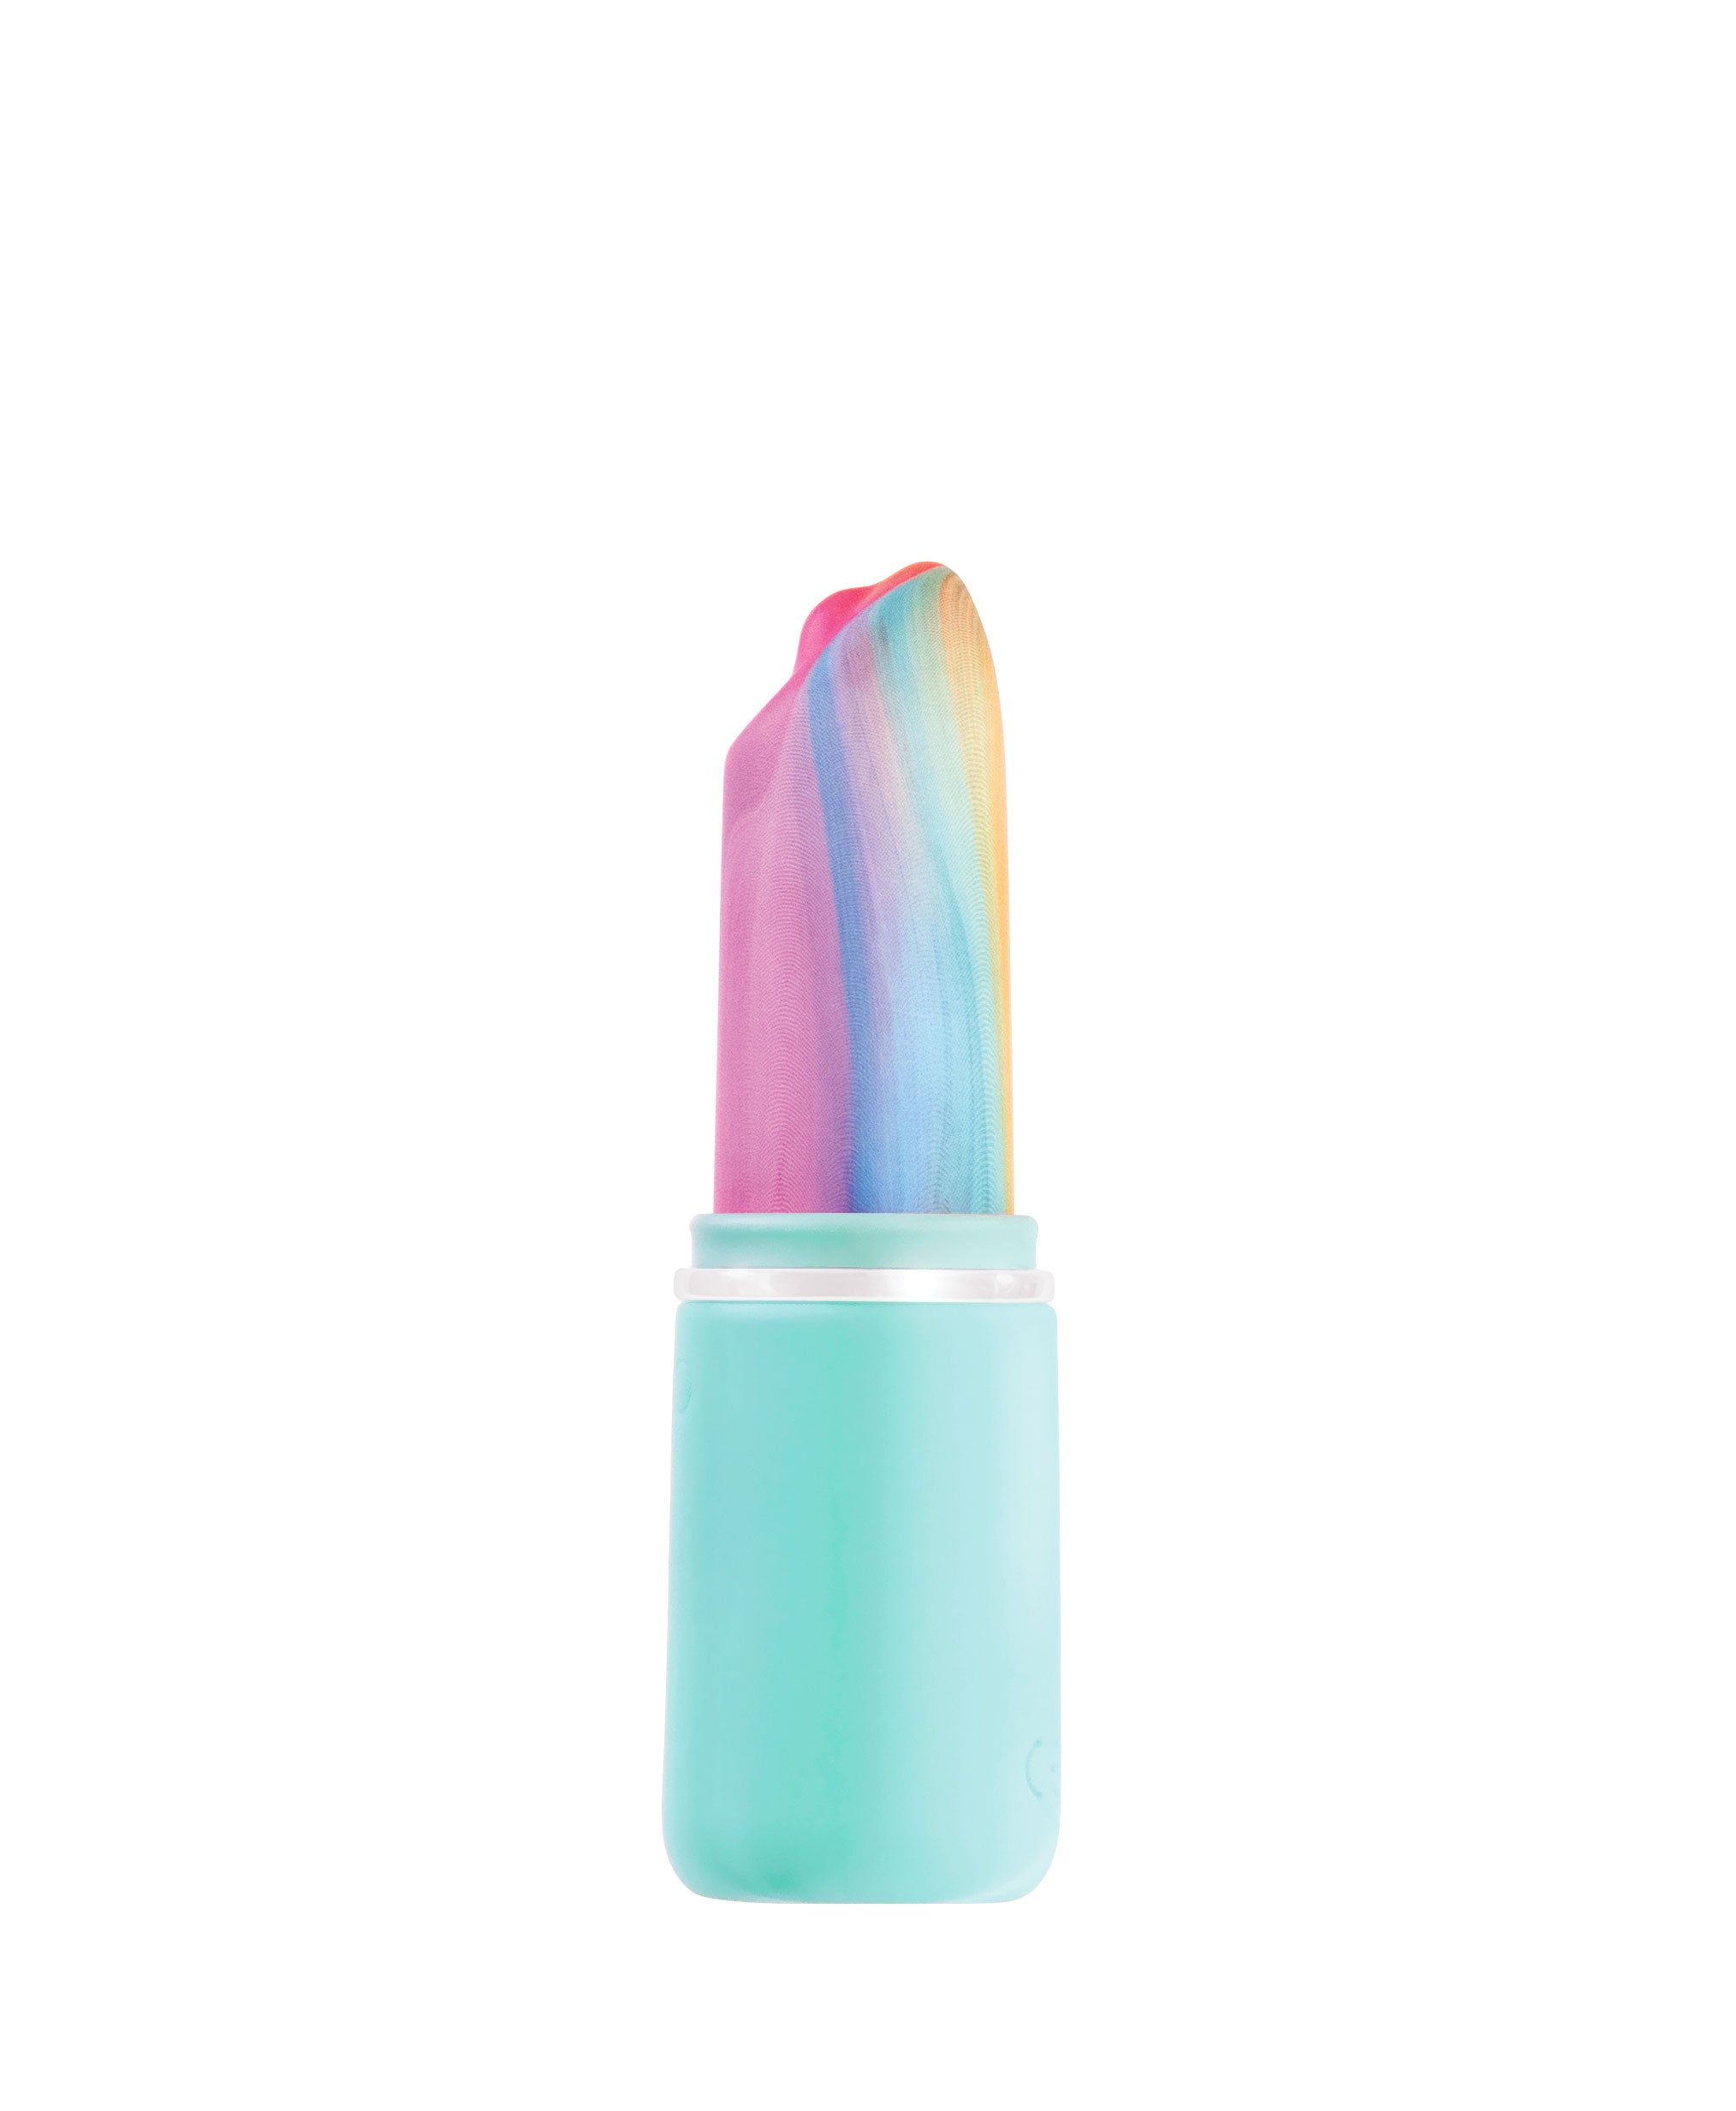 Retro Rechargeable Bullet - Turquoise-3